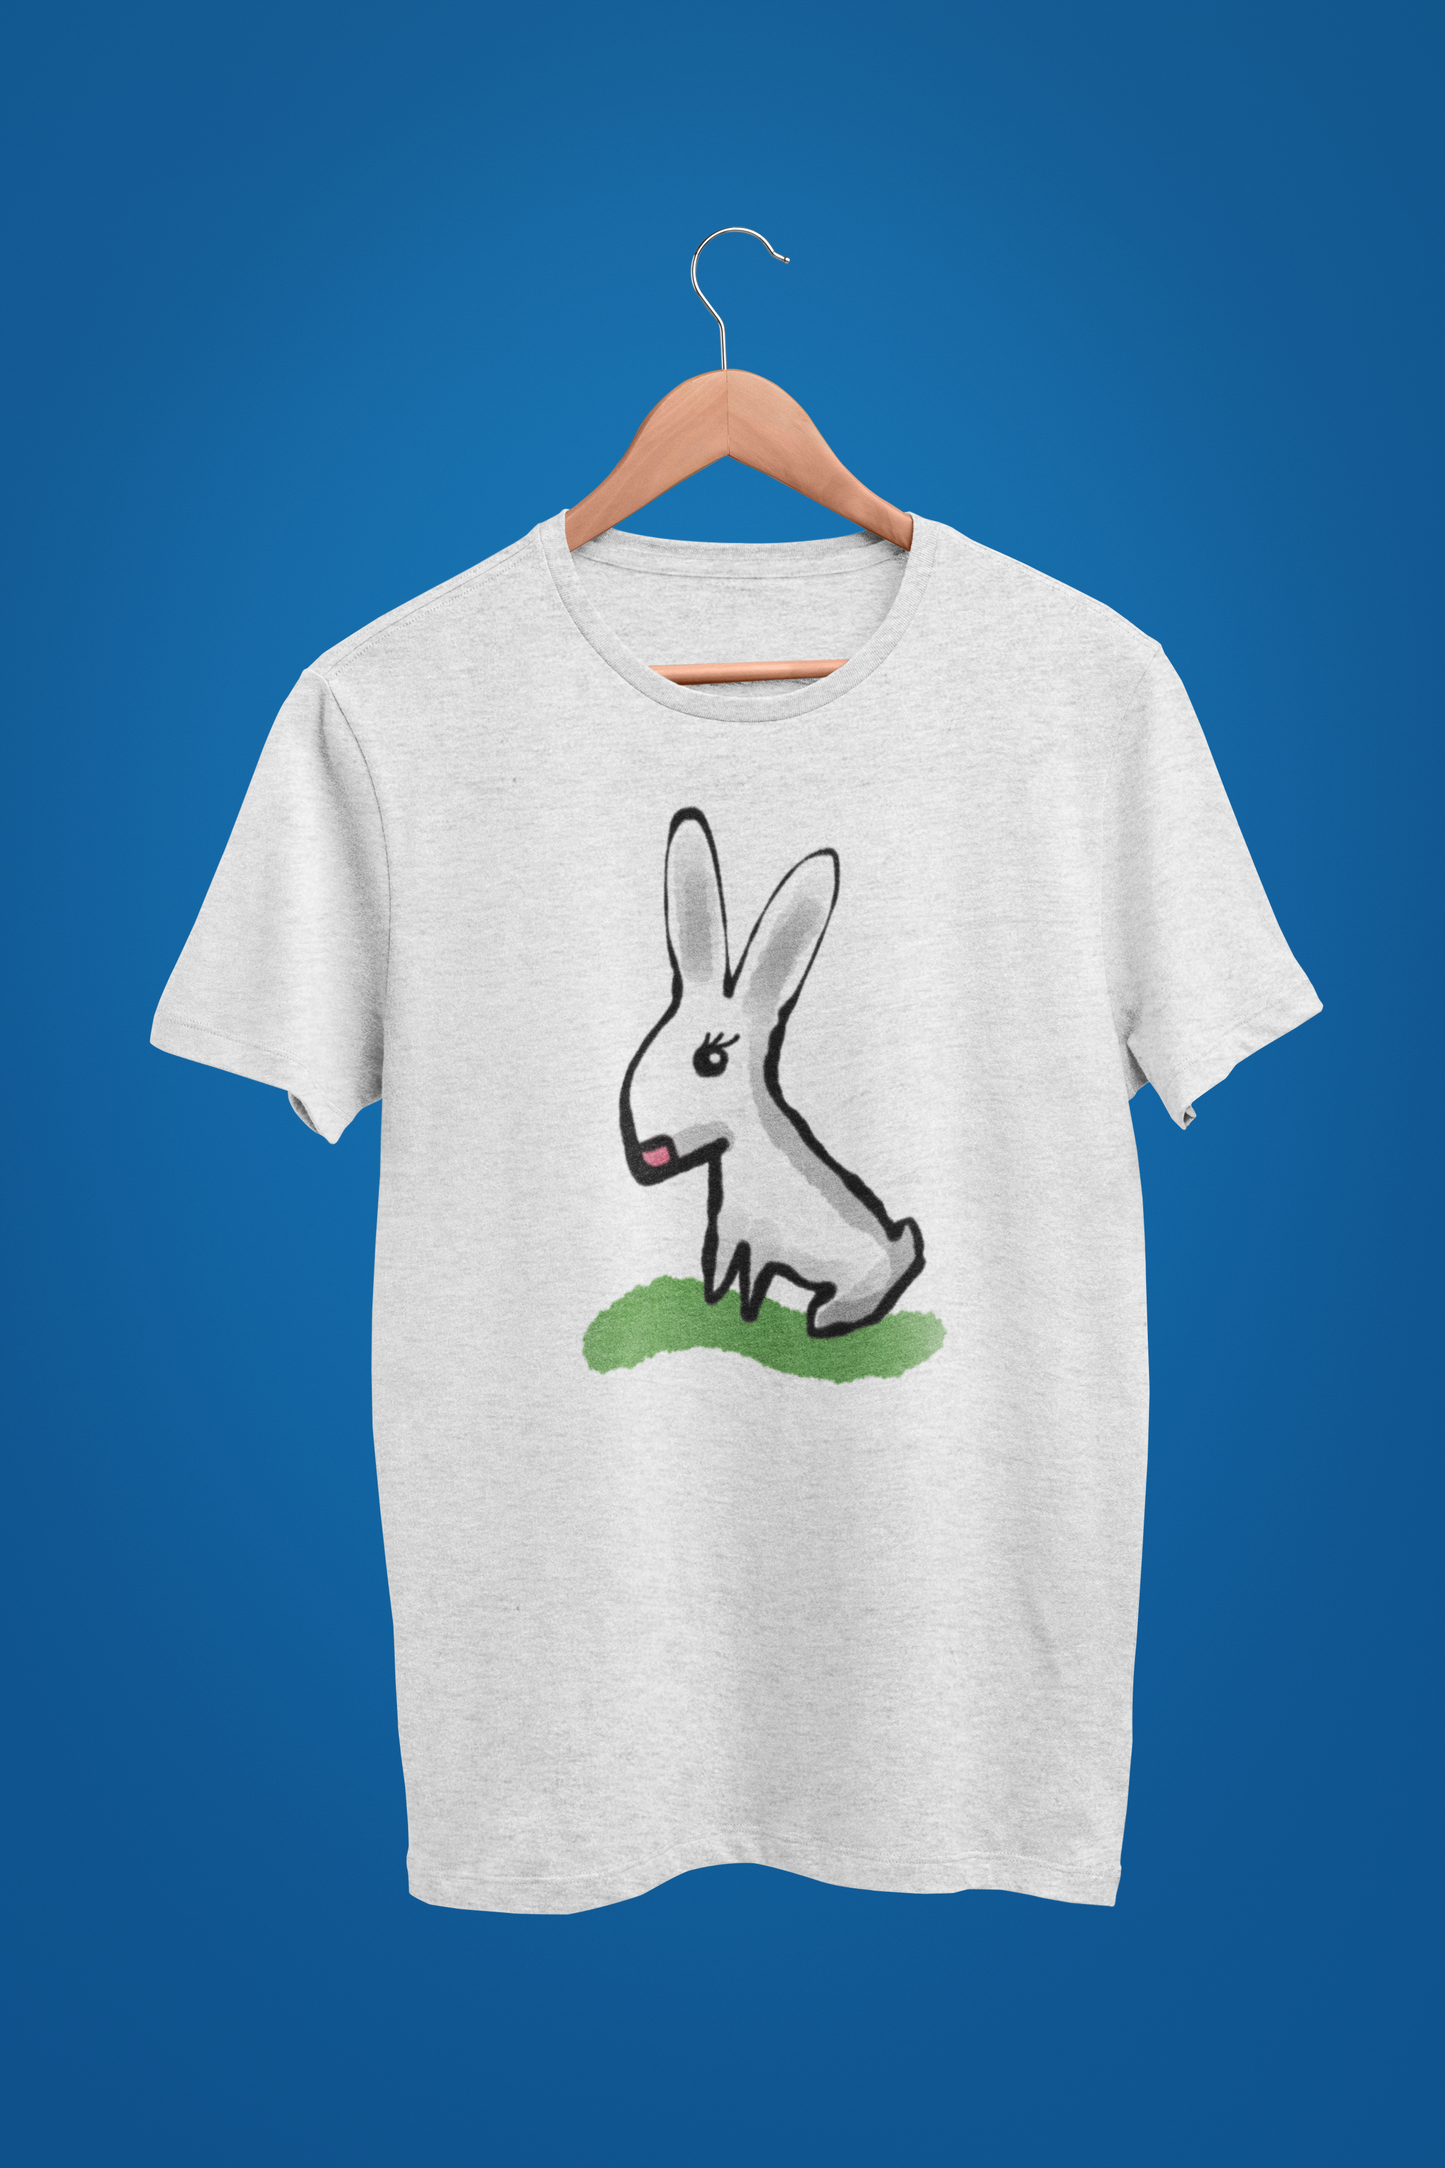 Cute Bunny T-shirt original illustrated design on cream heather grey colour vegan cotton t-shirts by Hector and Bone